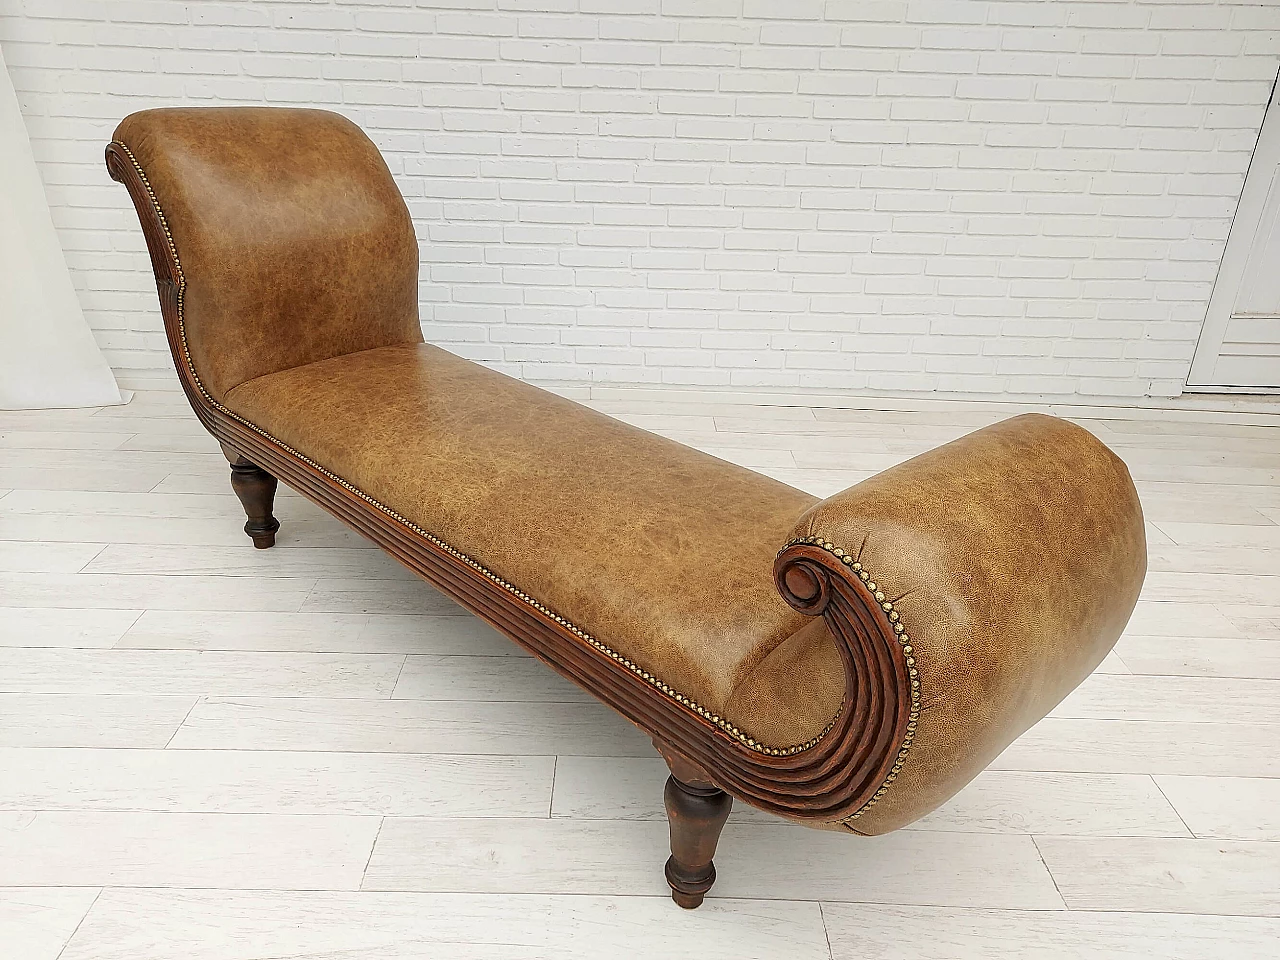 Danish antique chaise longue, early 20th century 1142183